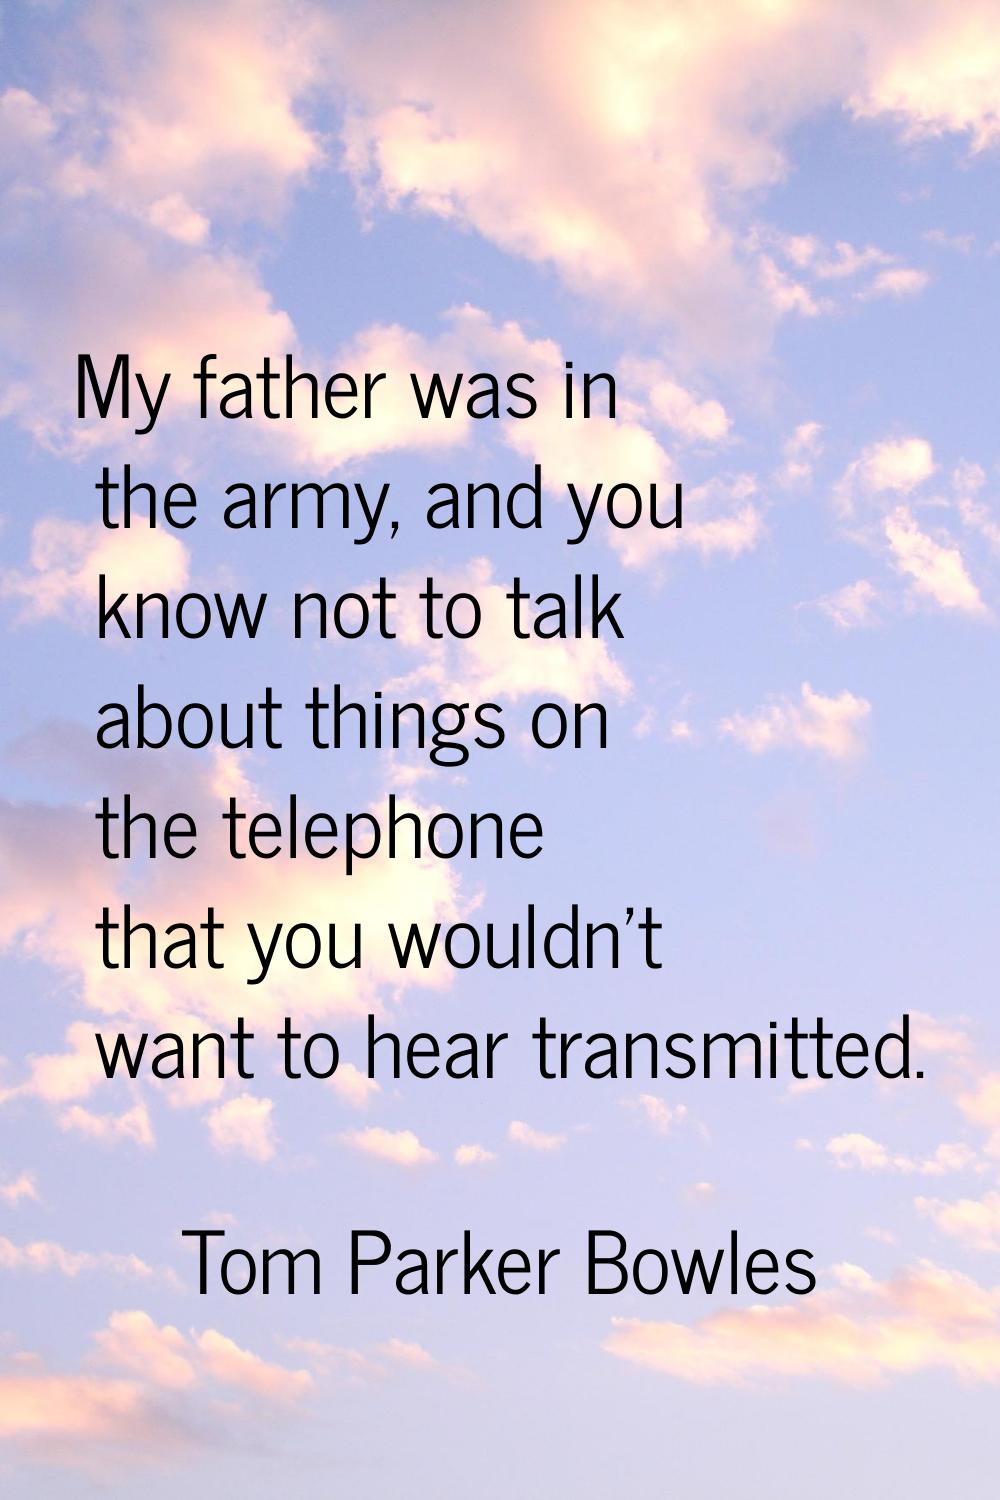 My father was in the army, and you know not to talk about things on the telephone that you wouldn't